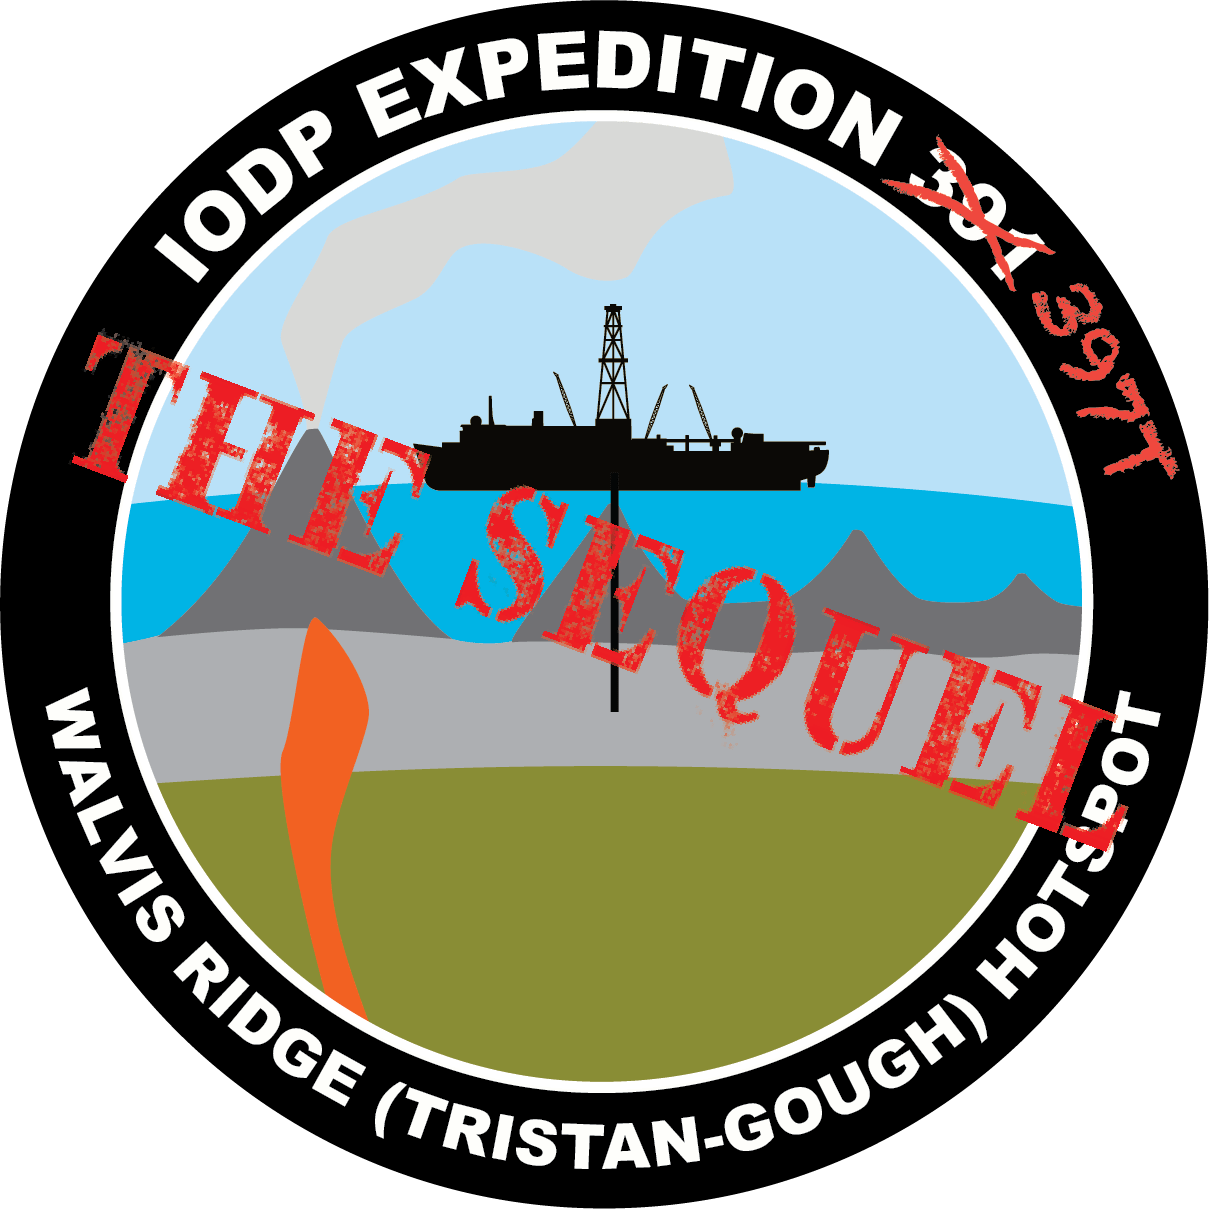 Expedition 391 patch featuring the JR drilling into a hotspot volcano. Modified with 397T written over 391 and "THE SEQUEL" printed over the patch.